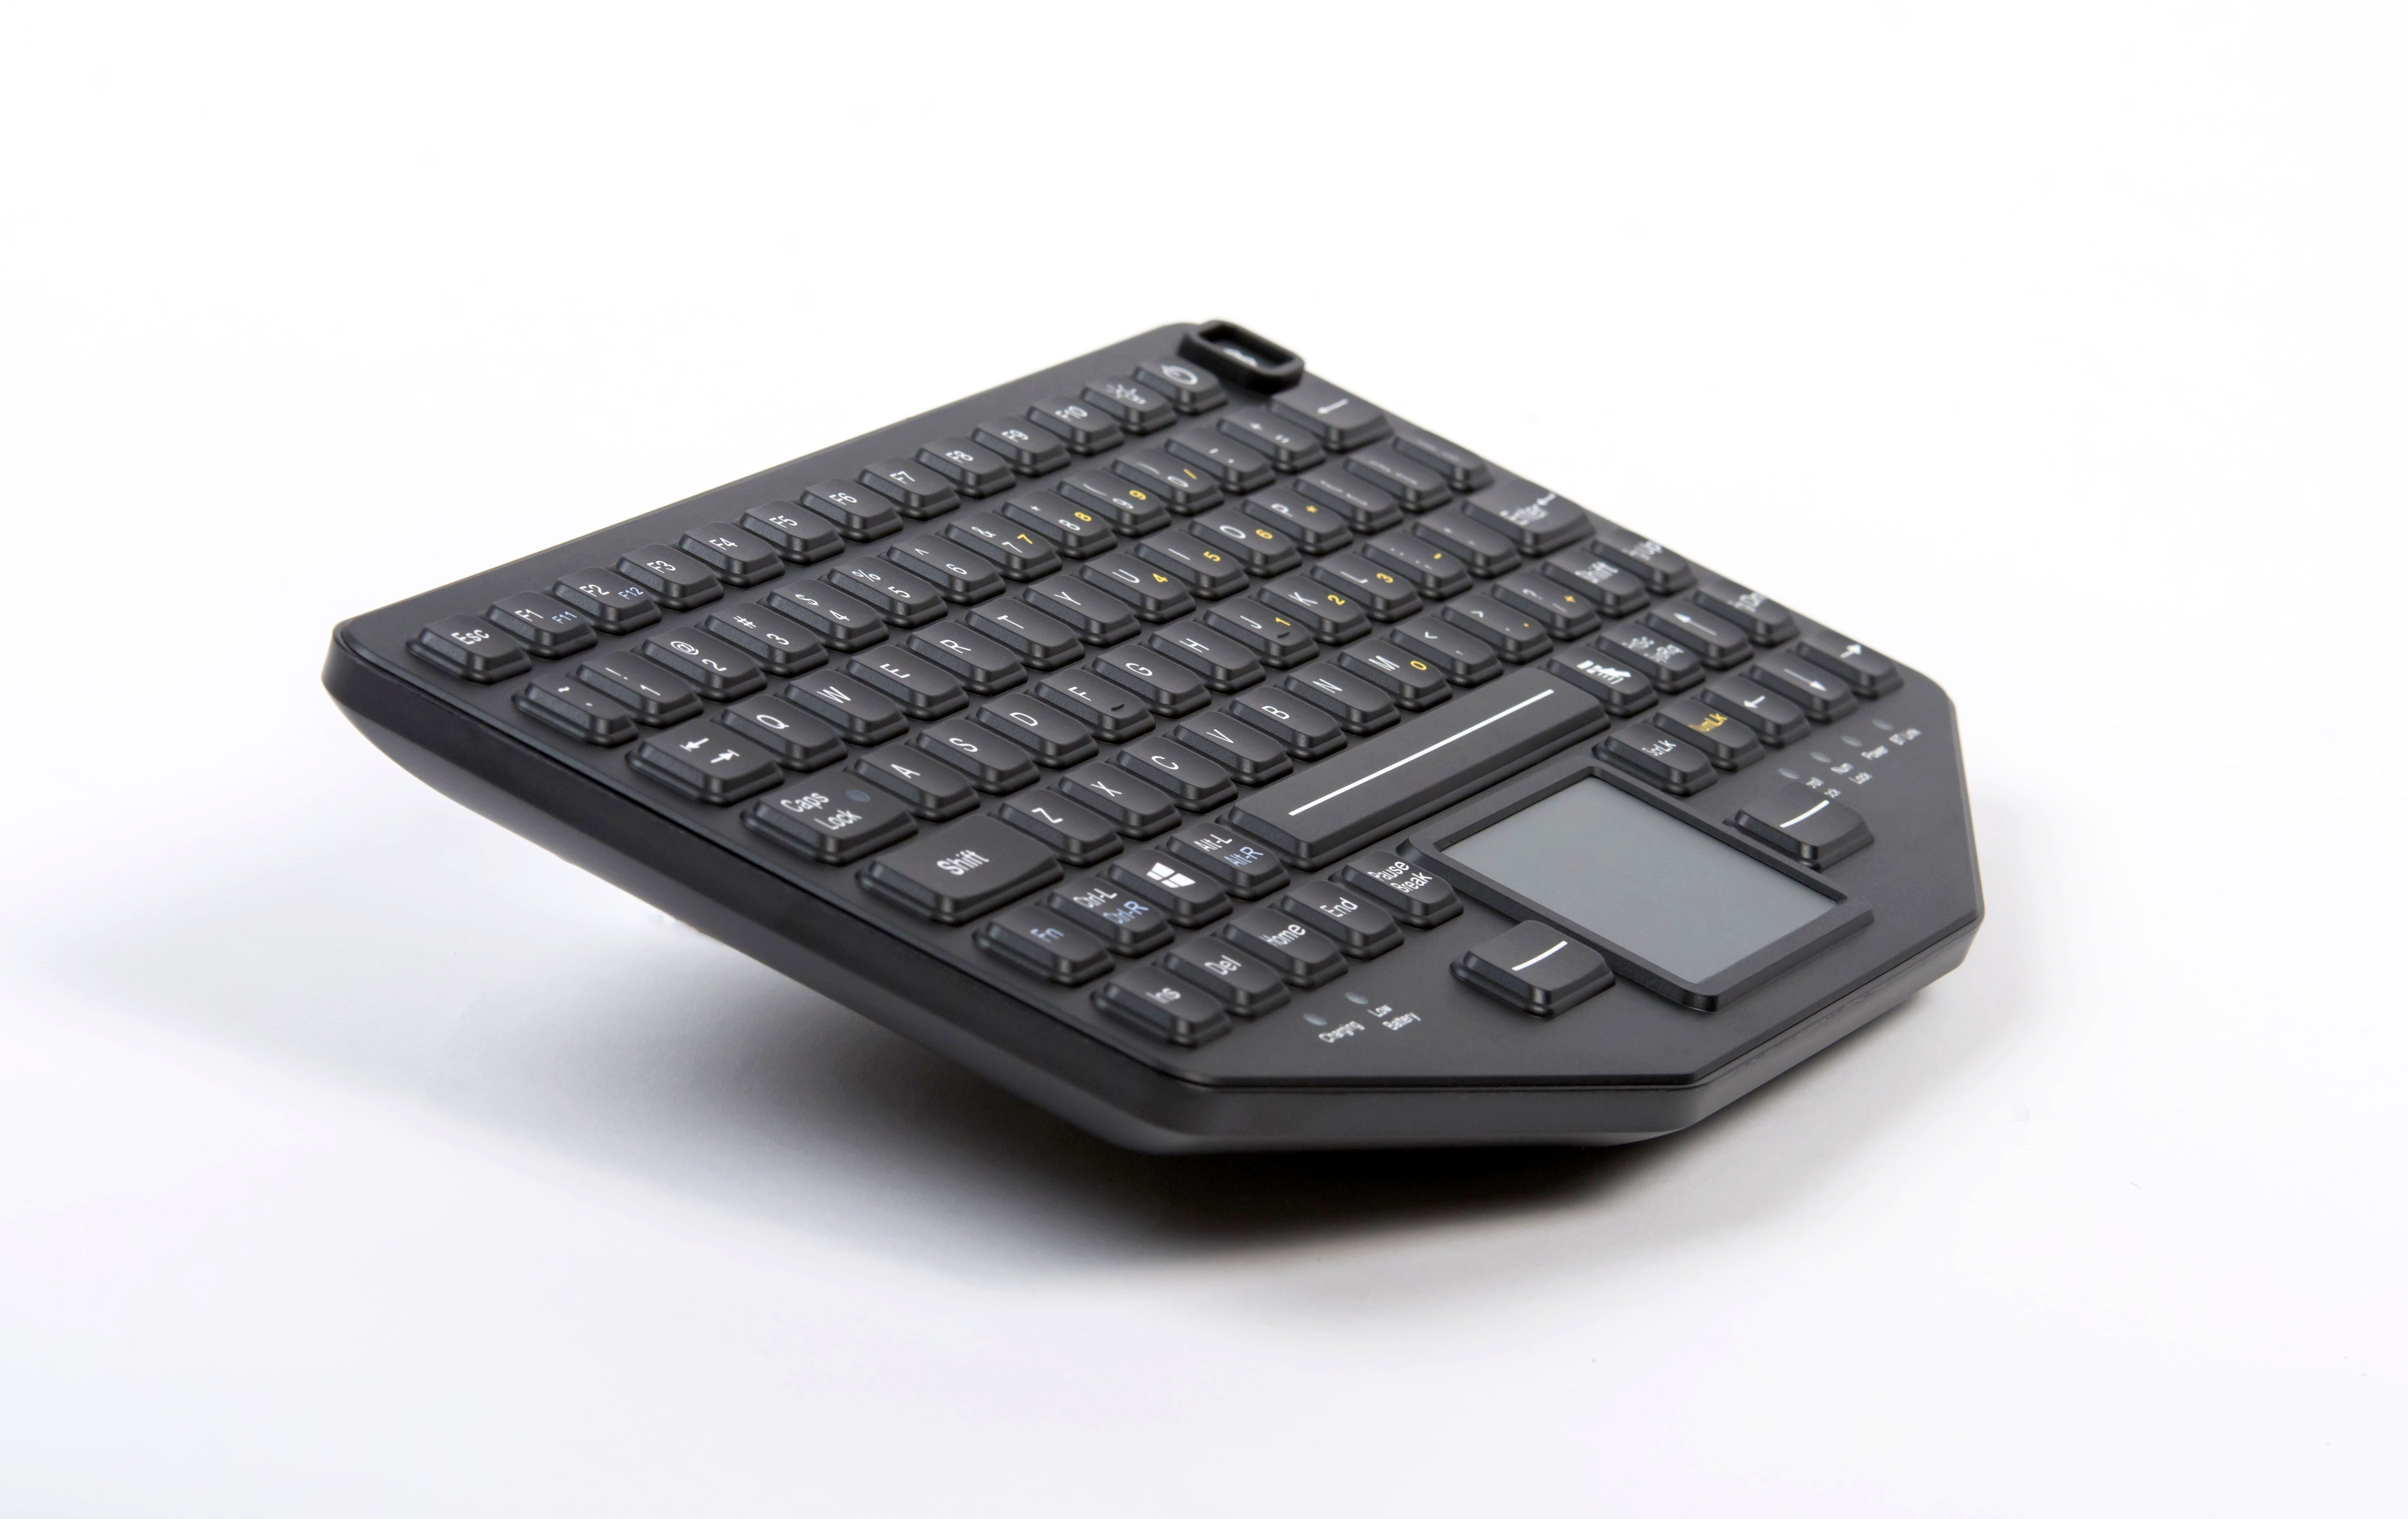 Introducing the BT-870-TP-SLIM Dual Connectivity Keyboard